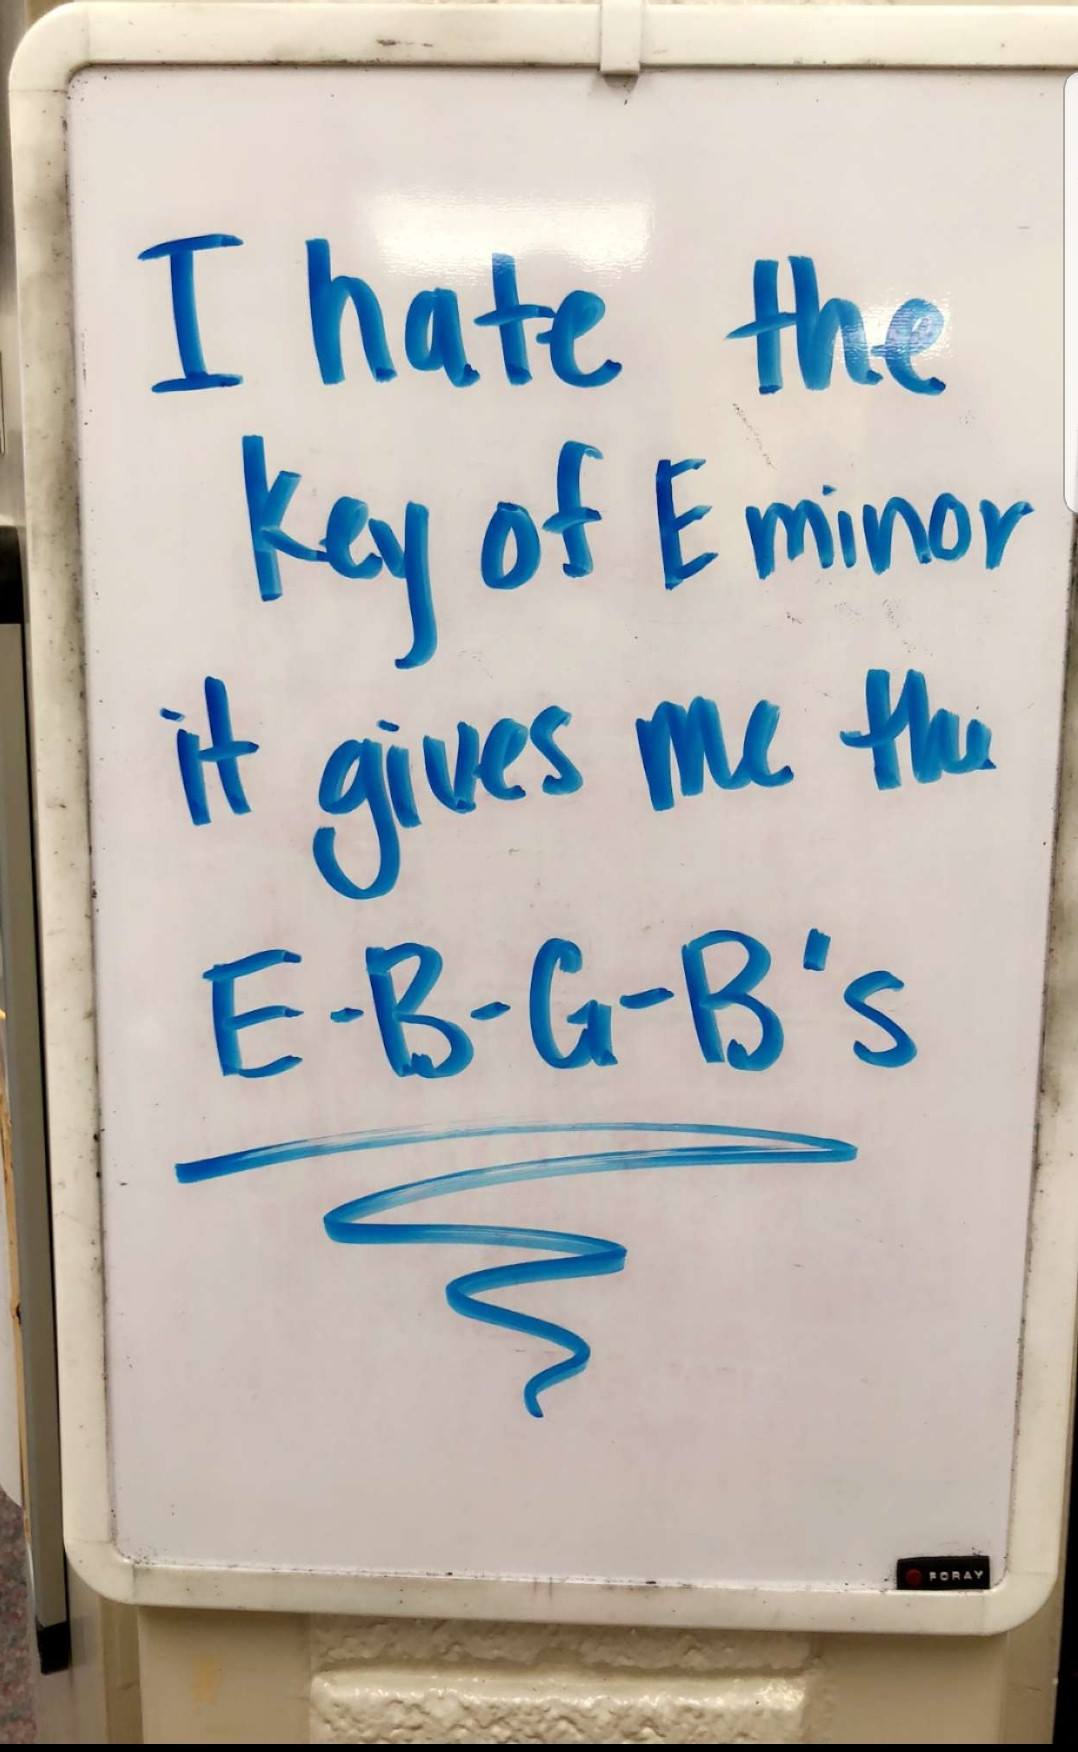 it gives that person the E B G Bs